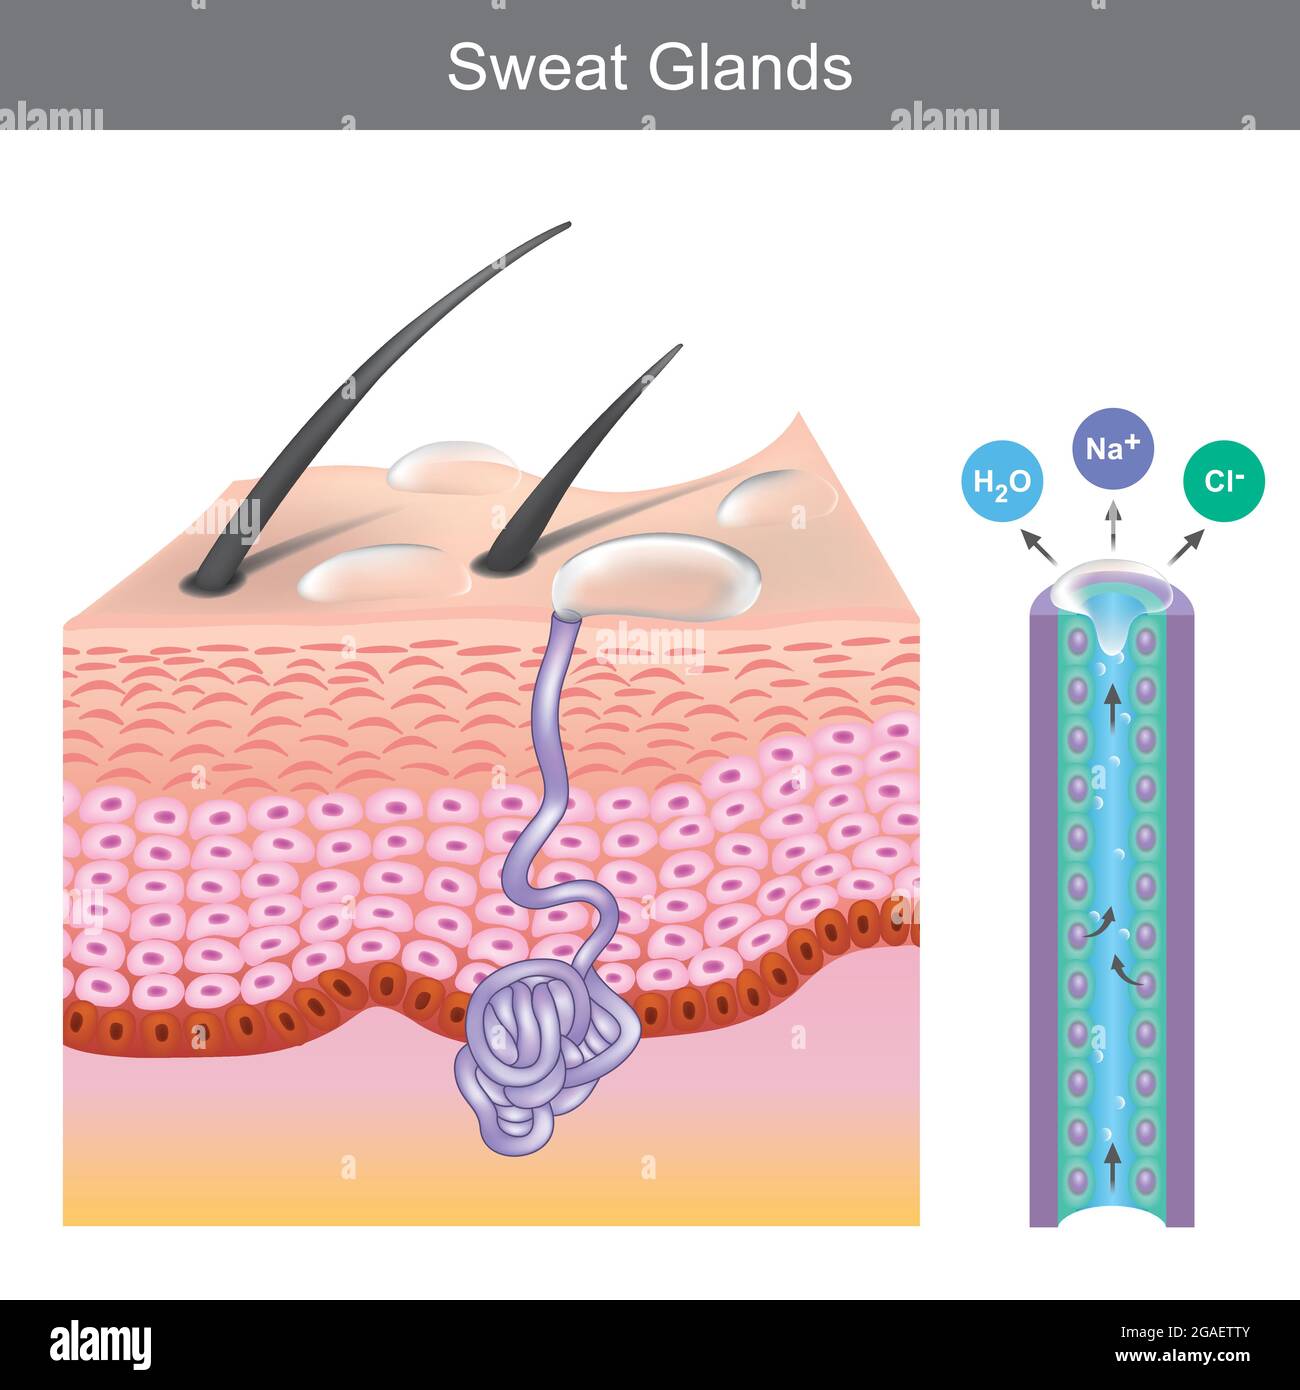 Sweat Glands. Illustration showing human sweat gland structure under skin layers. Stock Vector